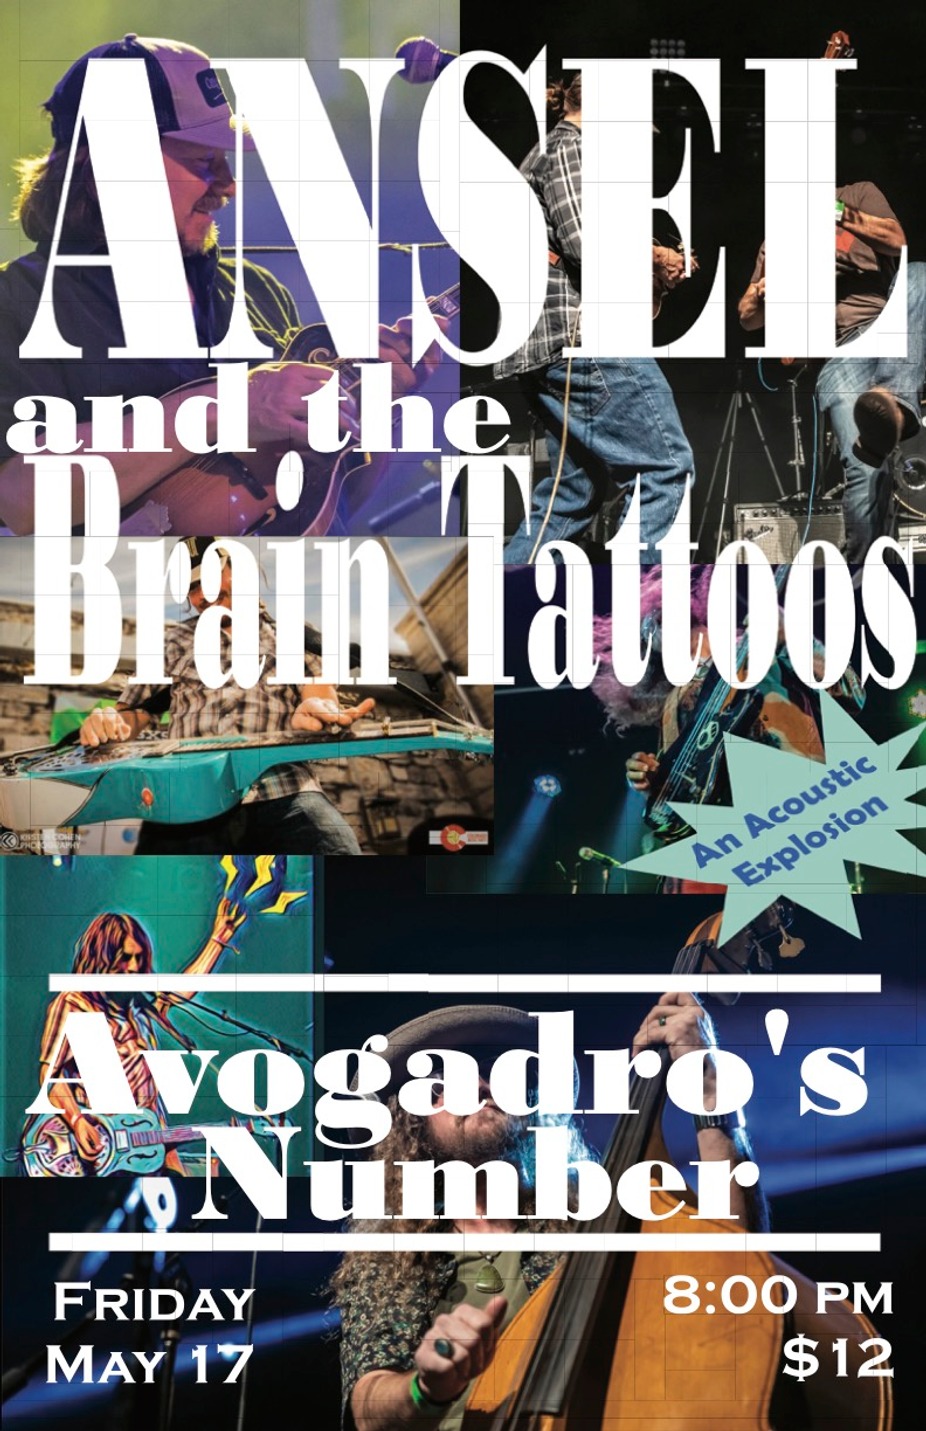 Ansel and the Brain Tattoos event photo